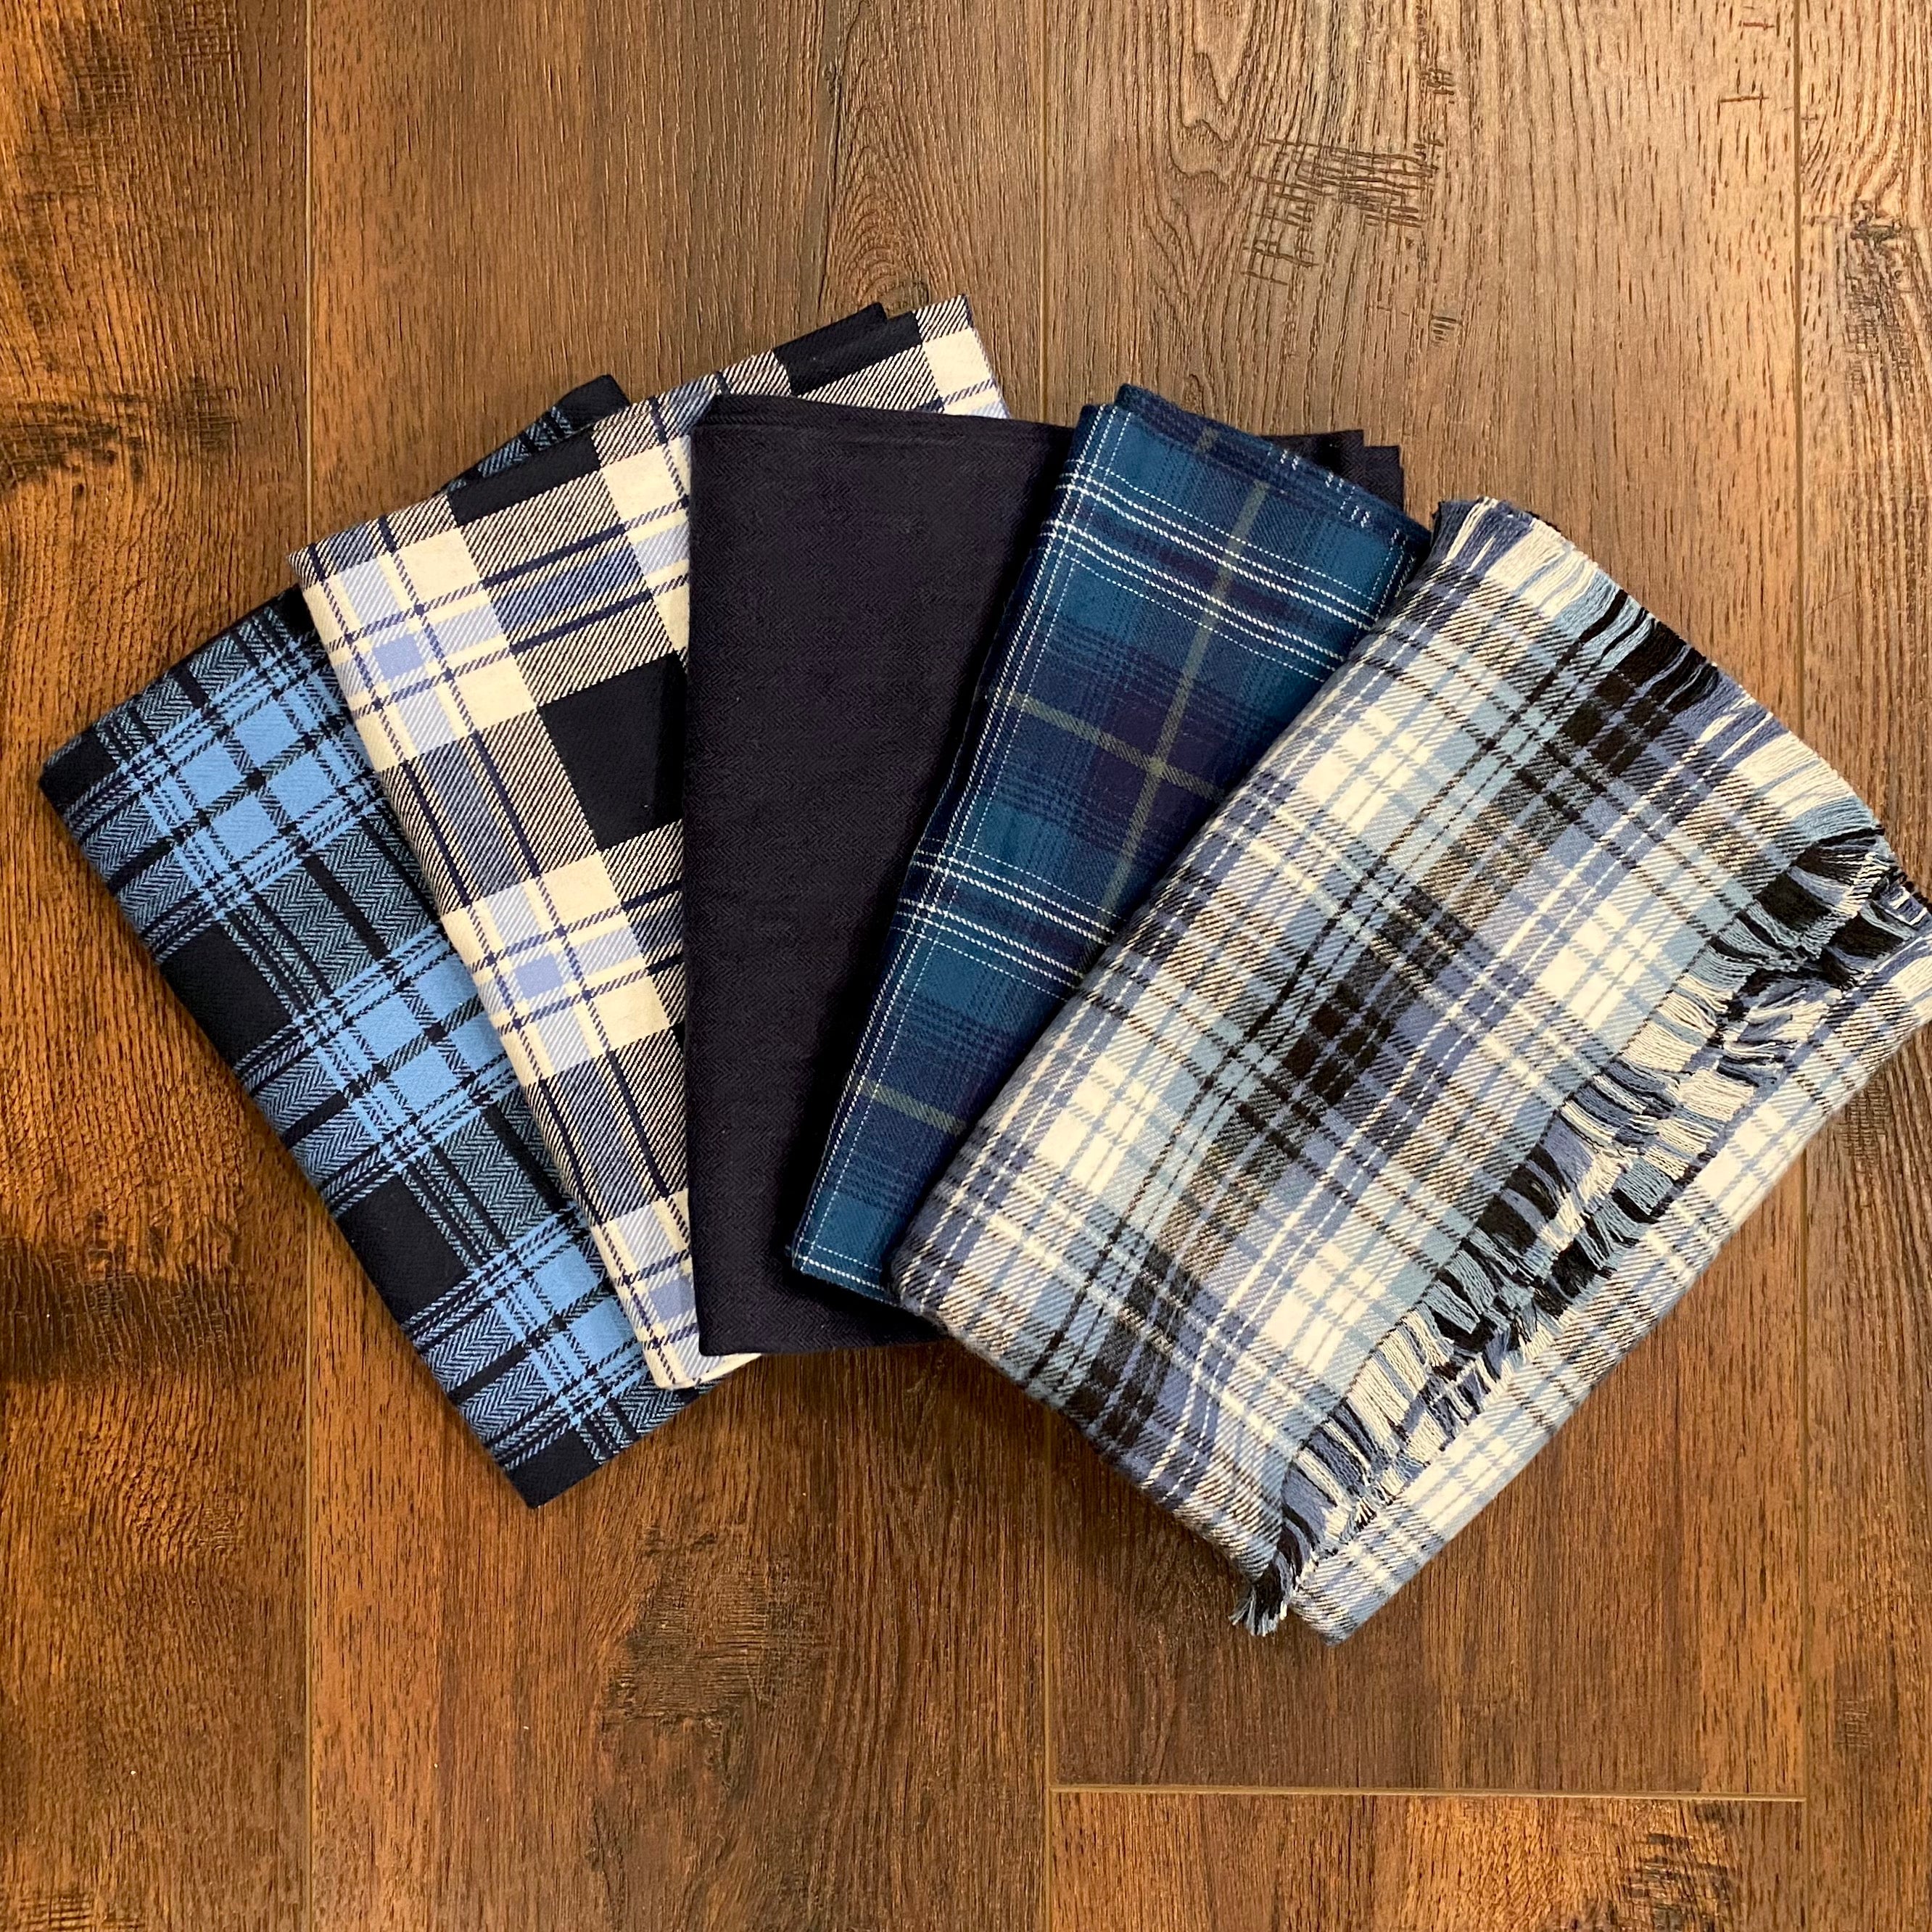 Navy Blue, Light French Blue, and White Flannel Plaid Infinity or Blanket Scarf